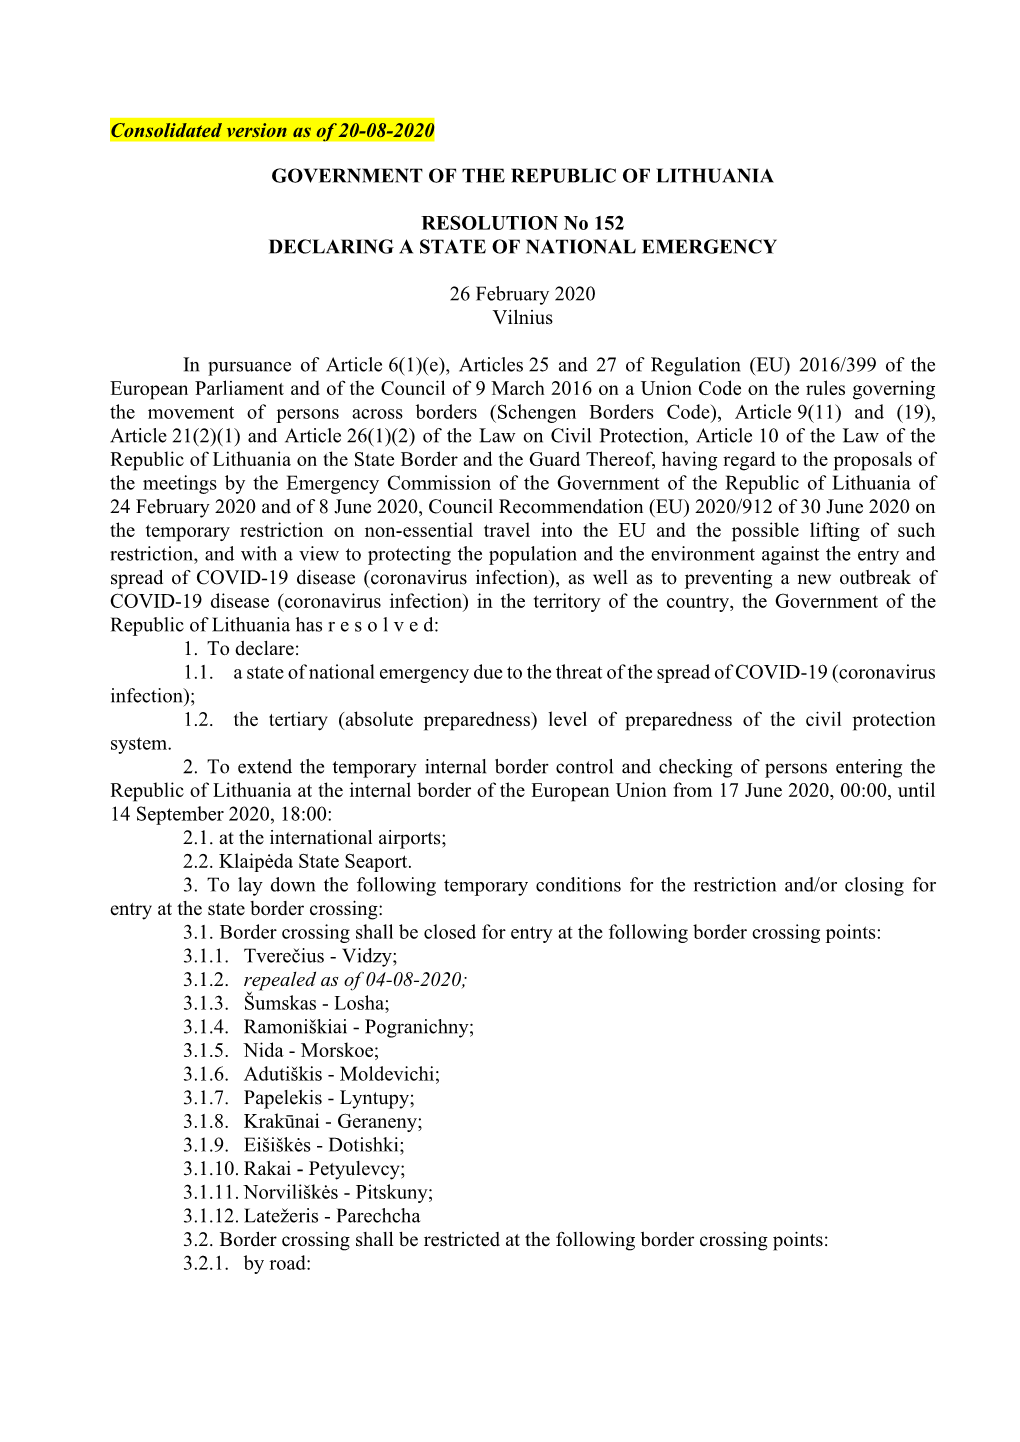 Consolidated Version As of 20-08-2020 GOVERNMENT of the REPUBLIC of LITHUANIA RESOLUTION No 152 DECLARING a STATE of NATIONAL EM